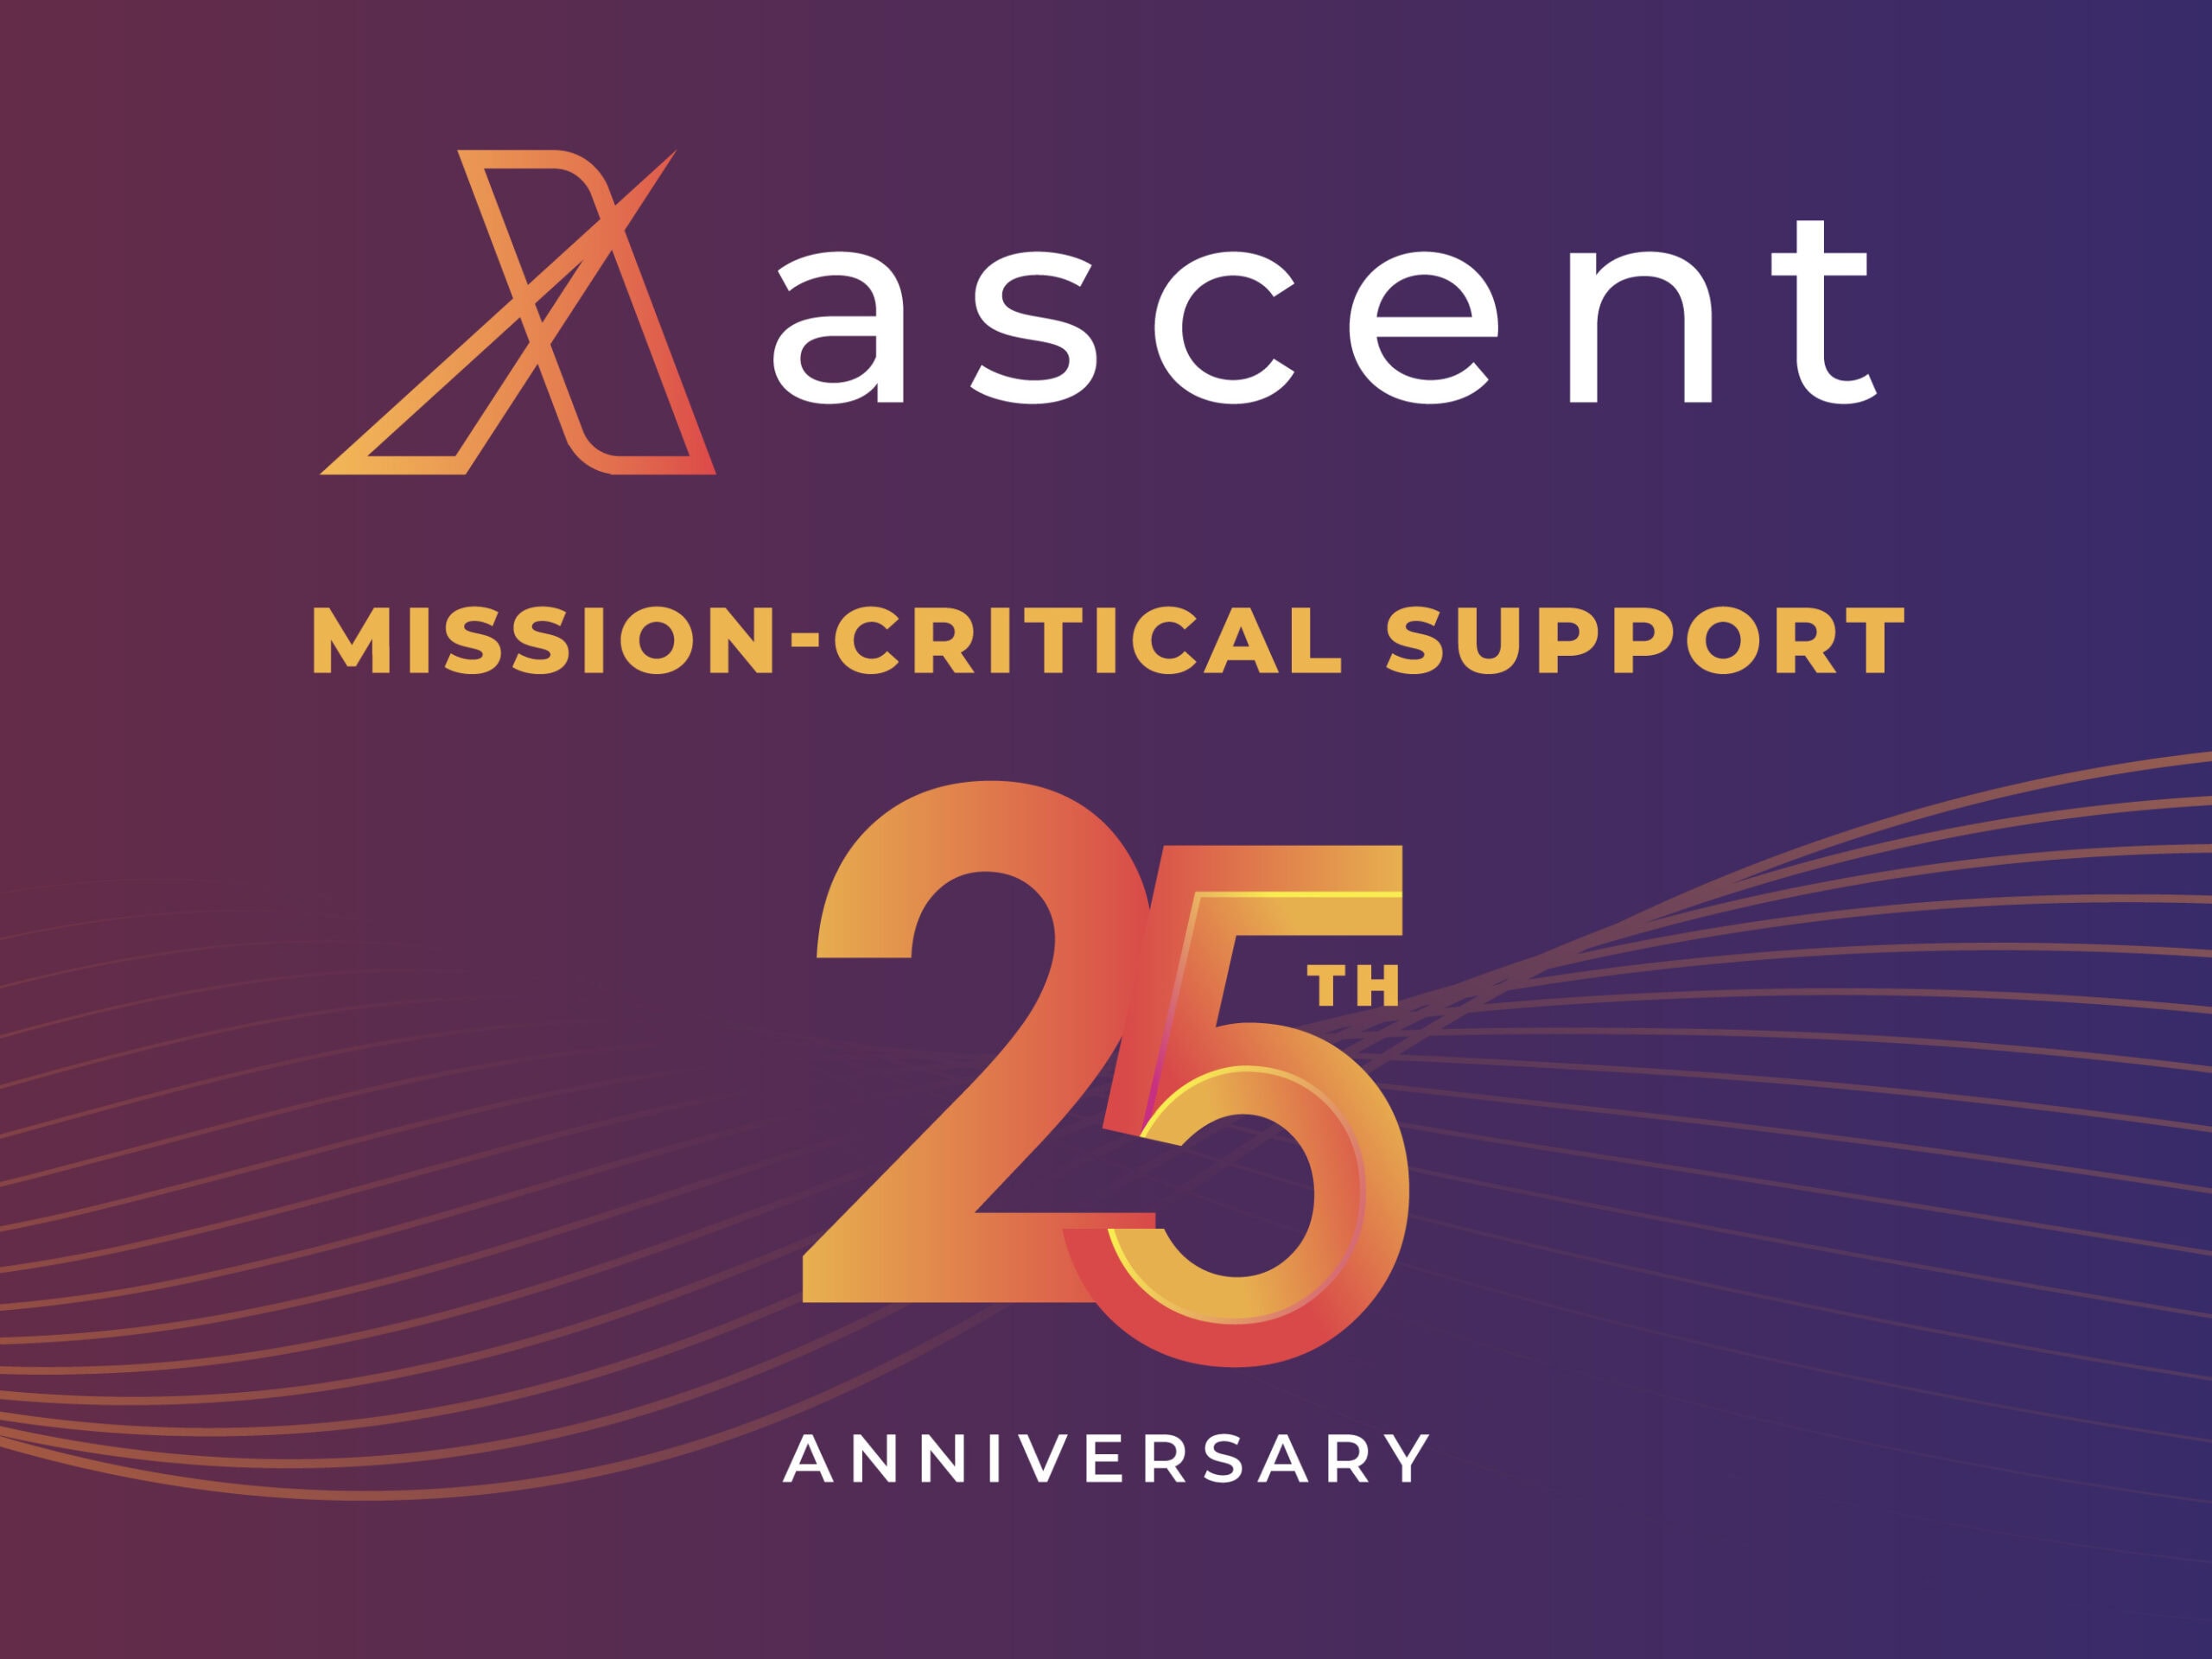 Ascent Legacy of Leadership